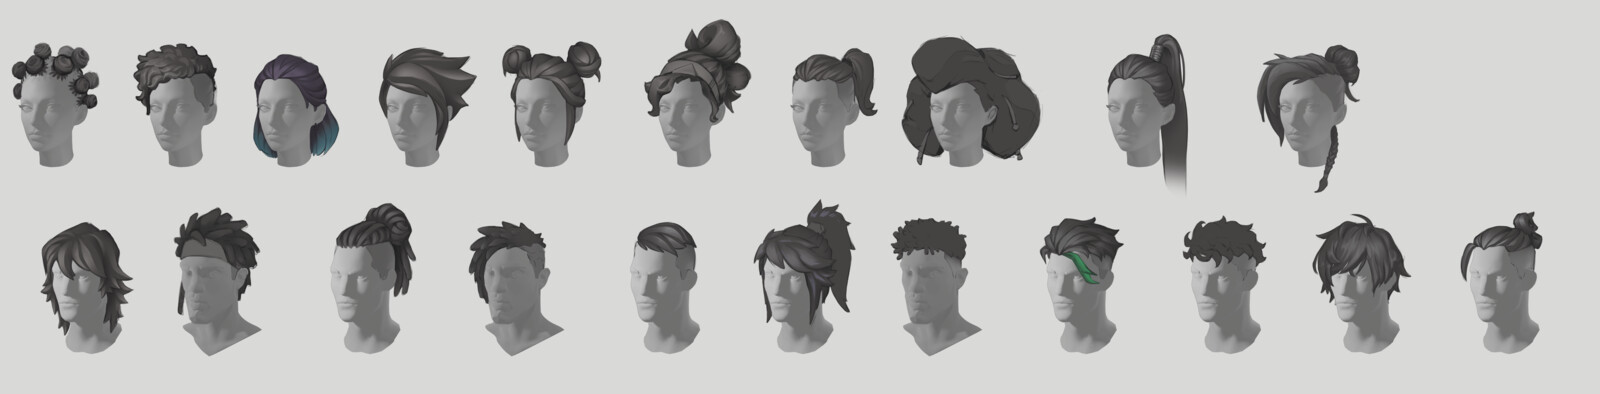 Batch of hairstyles